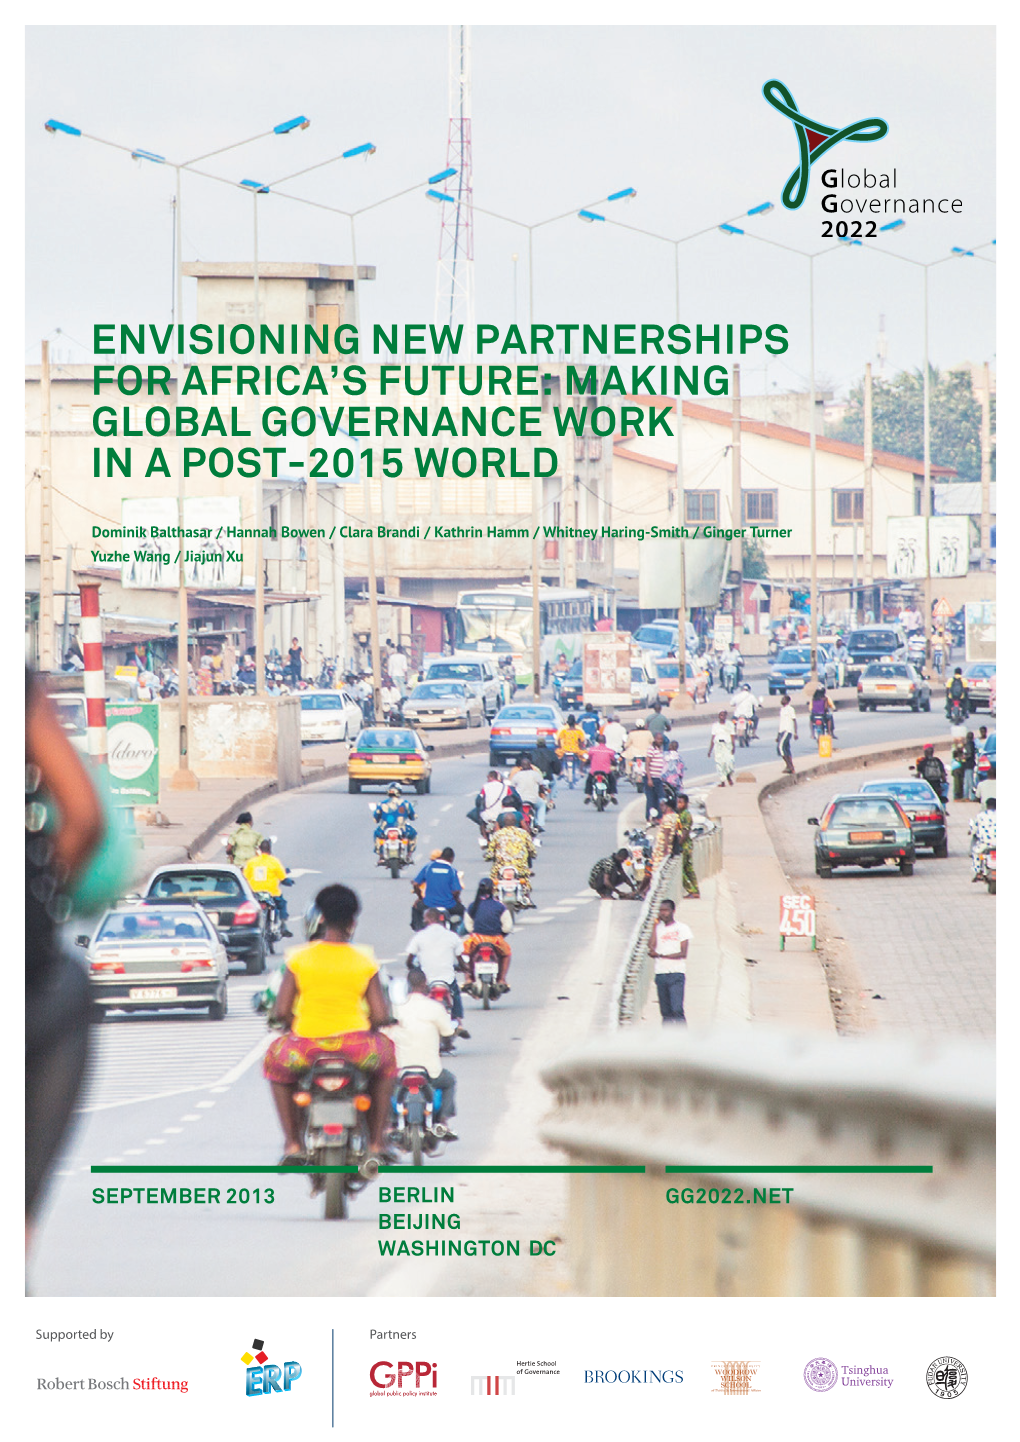 Envisioning NEW PARTNERSHIPS for AFRICA’S Future: Making GLOBAL Governance Work in a POST-2015 WORLD